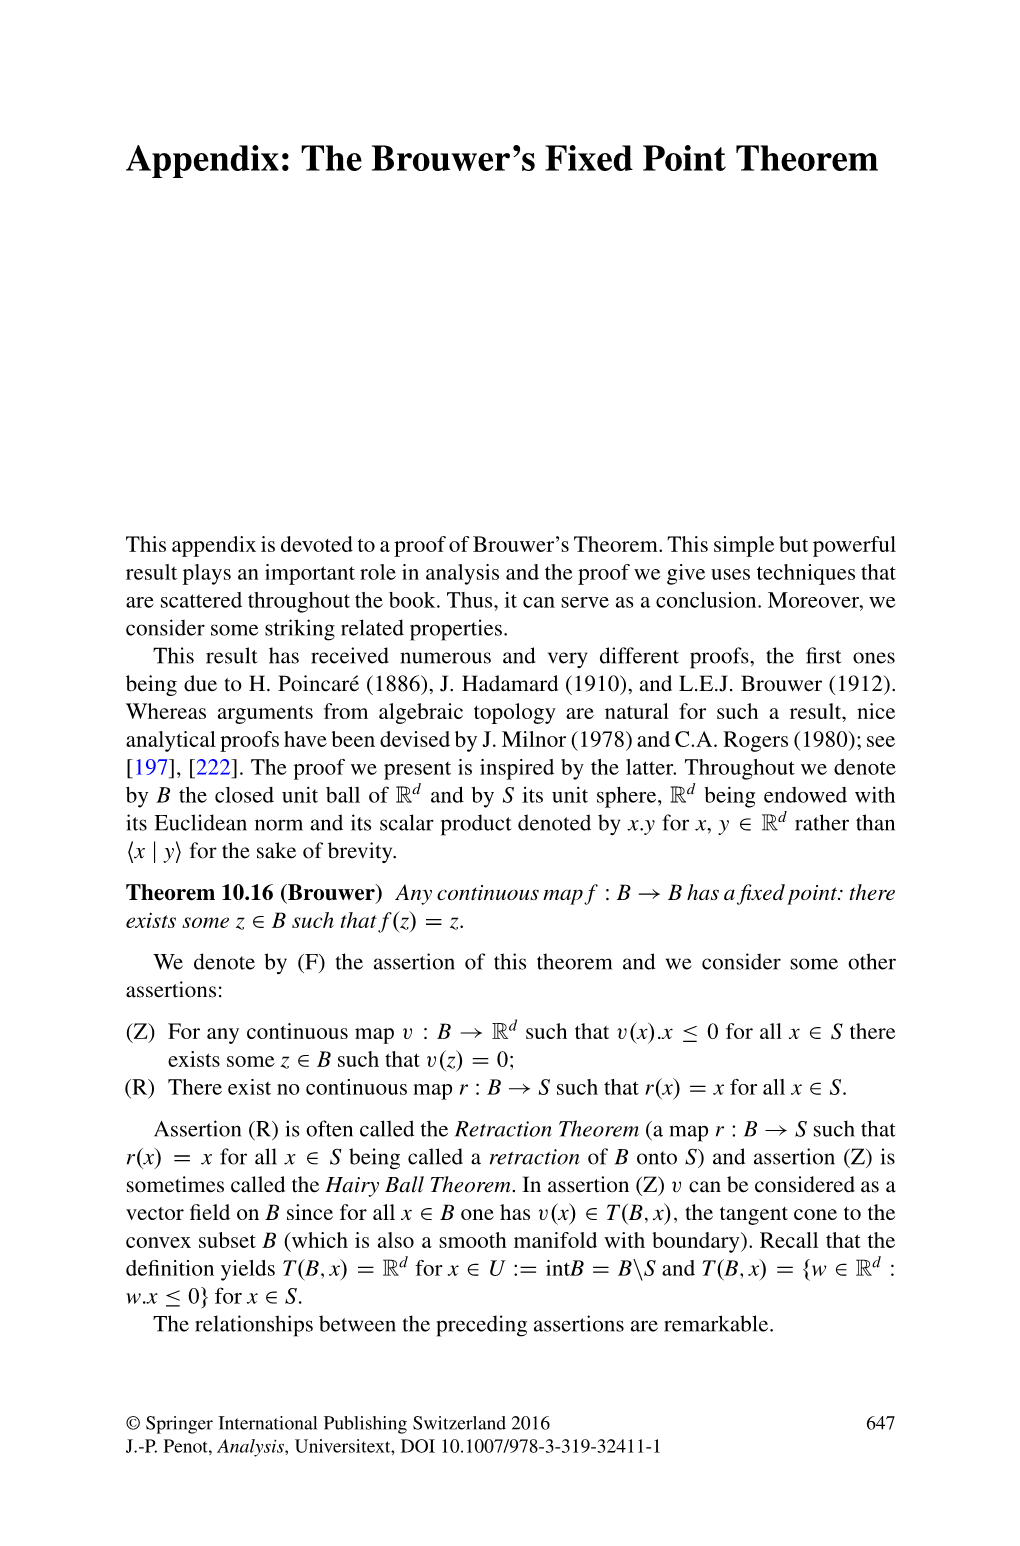 Appendix: the Brouwer's Fixed Point Theorem